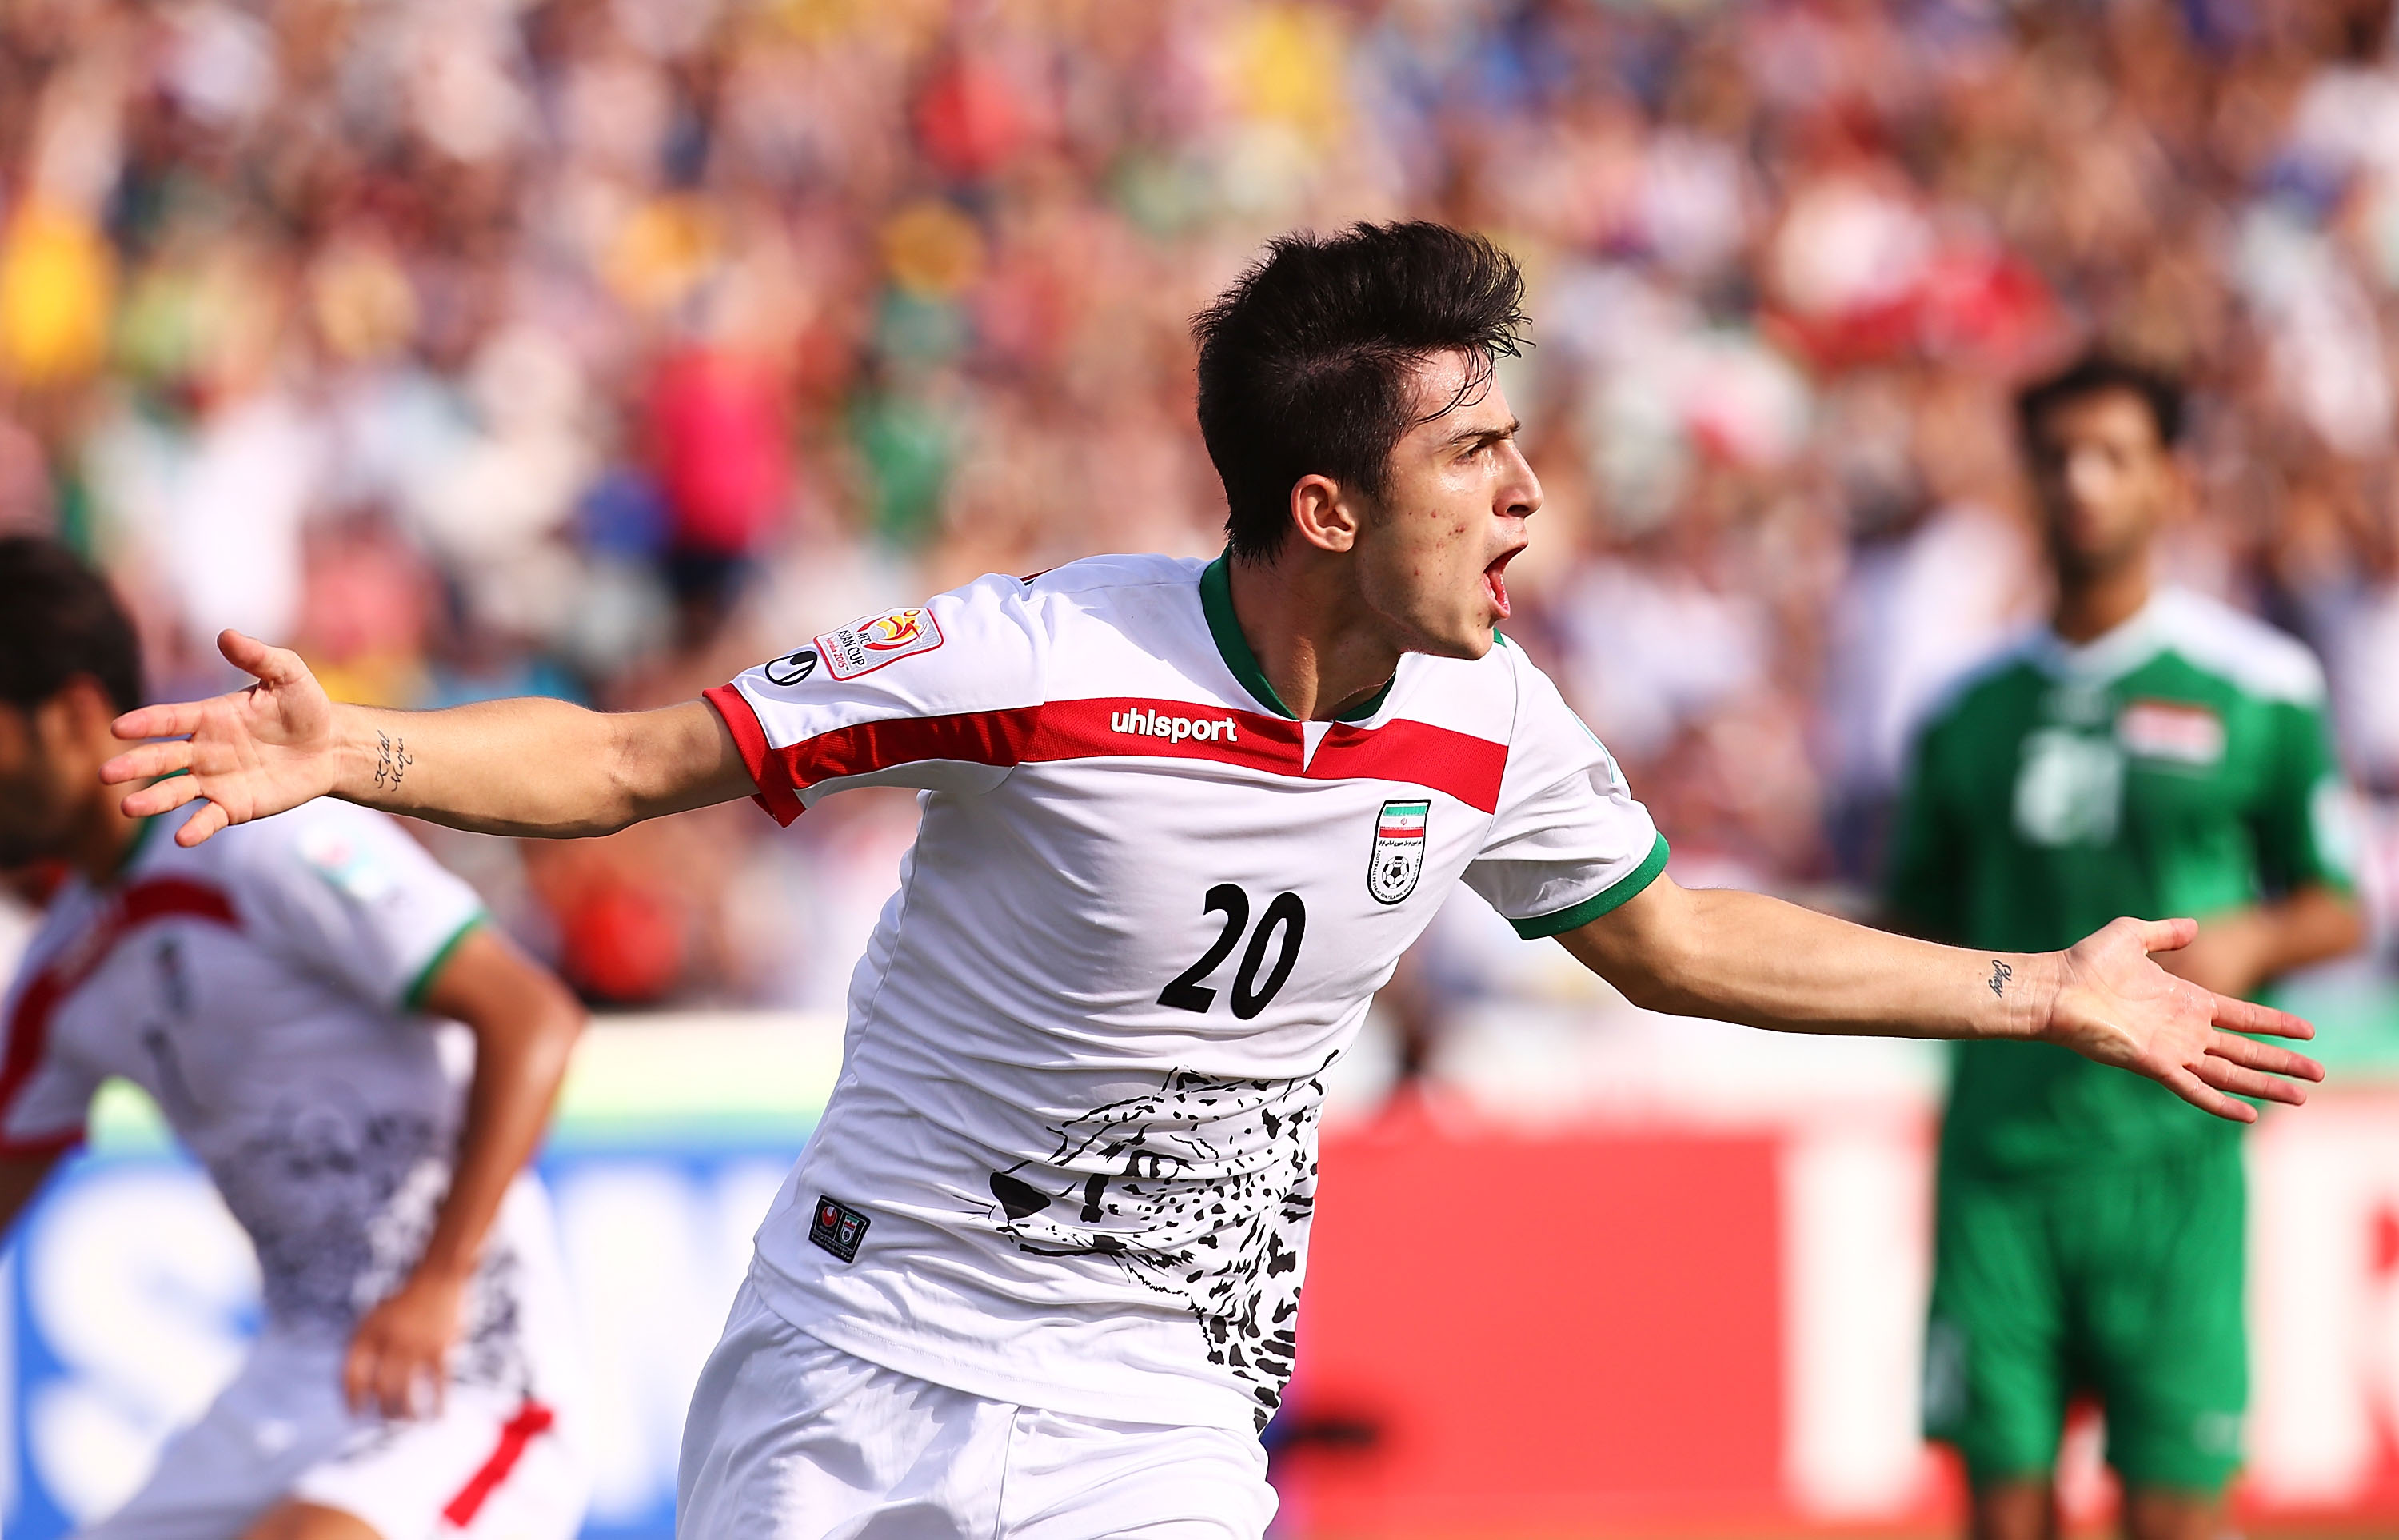 CANBERRA, AUSTRALIA - JANUARY 23: Sardar Azmoun of Iran celebrates scoring a goal during the 2015 Asian Cup match between Iran and Iraq at Canberra Stadium on January 23, 2015 in Canberra, Australia.  (Photo by Mark Nolan/Getty Images)